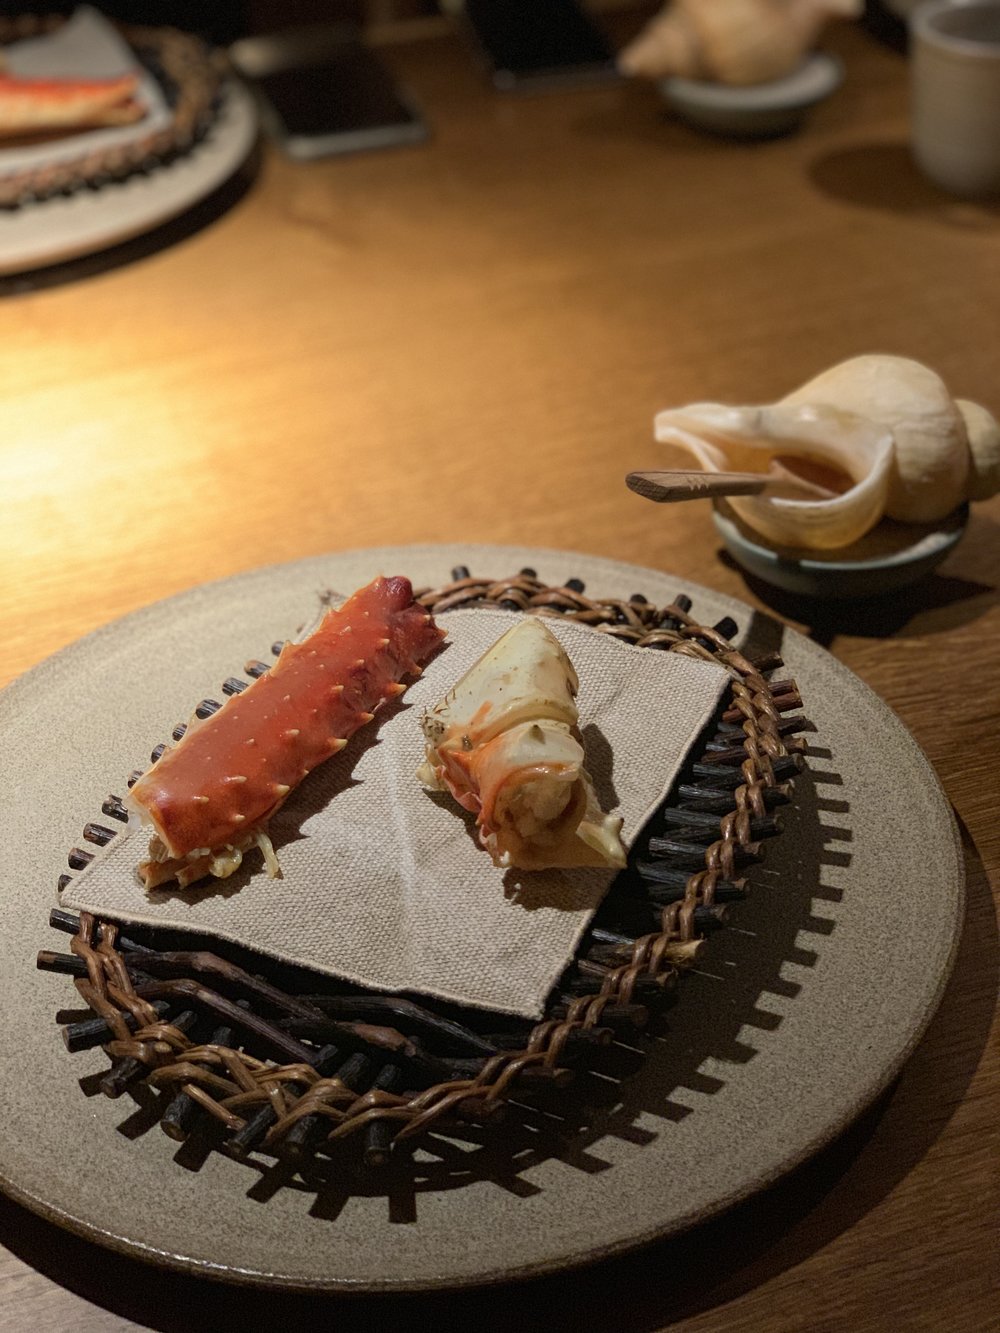  King crab from Norway. Kept alive at Noma until cooked. Hot smoked, then barbecued and seasoned with a sauce of sonicated horseradish (displayed inside a lovely shell). 